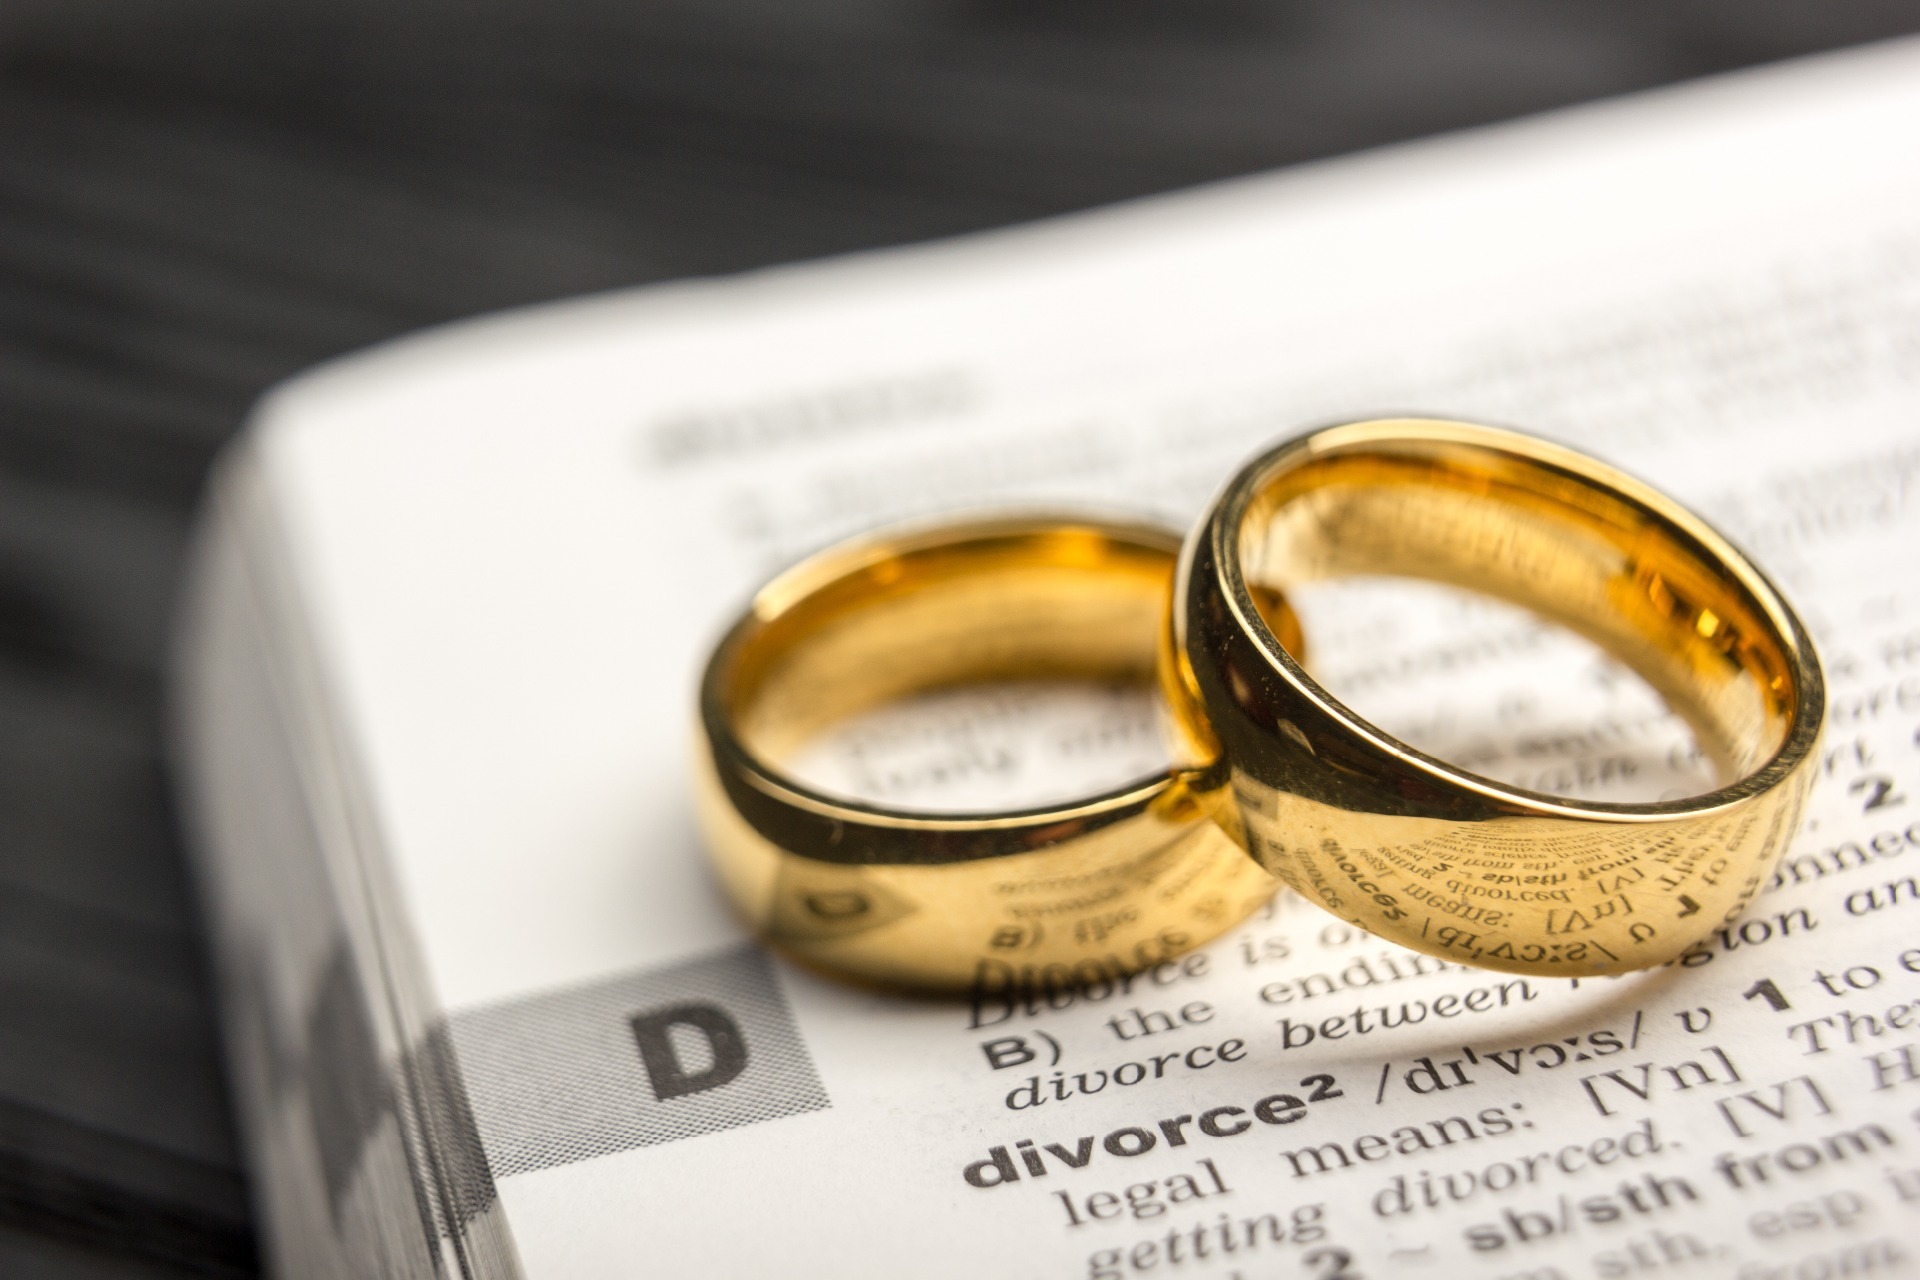 Divorce: a pair of wedding rings resting on a dictionary, showing the word 'Divorce'.